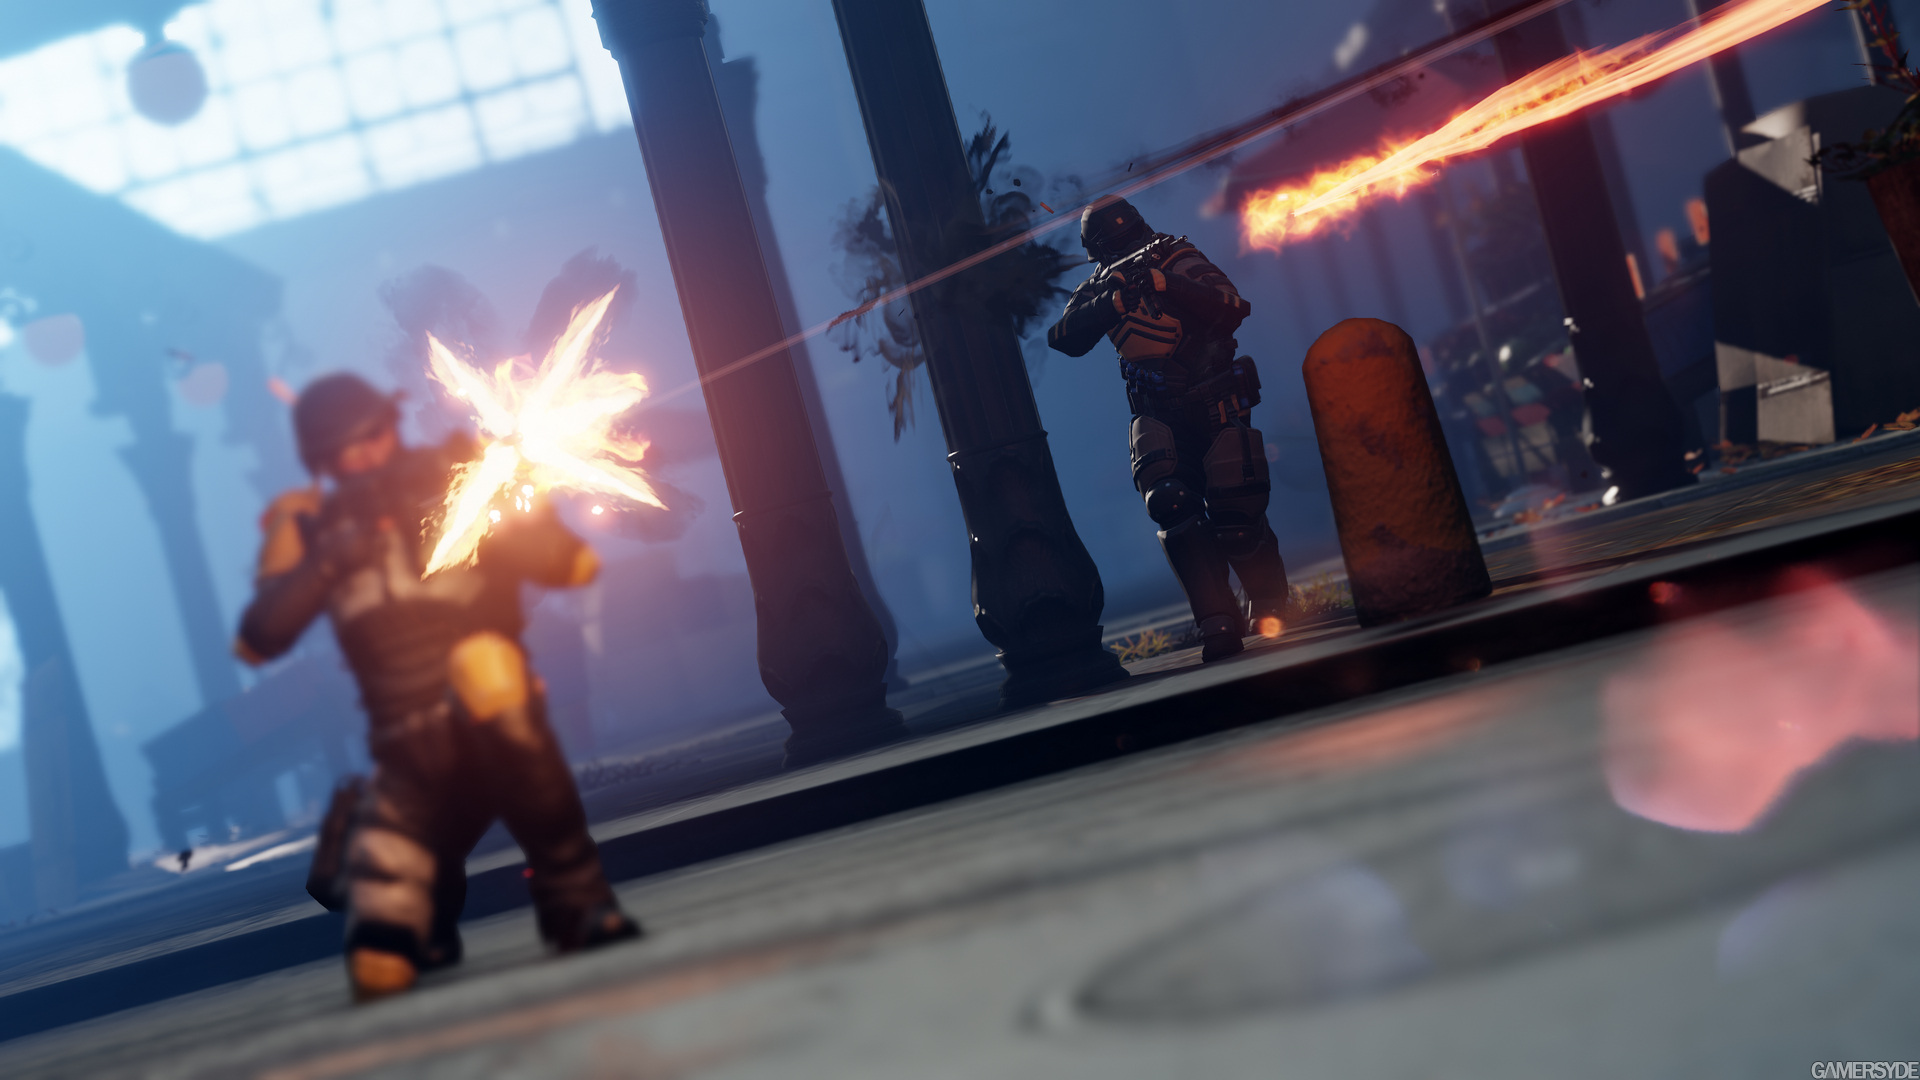 image_infamous_second_son-22309-2661_0004.jpg